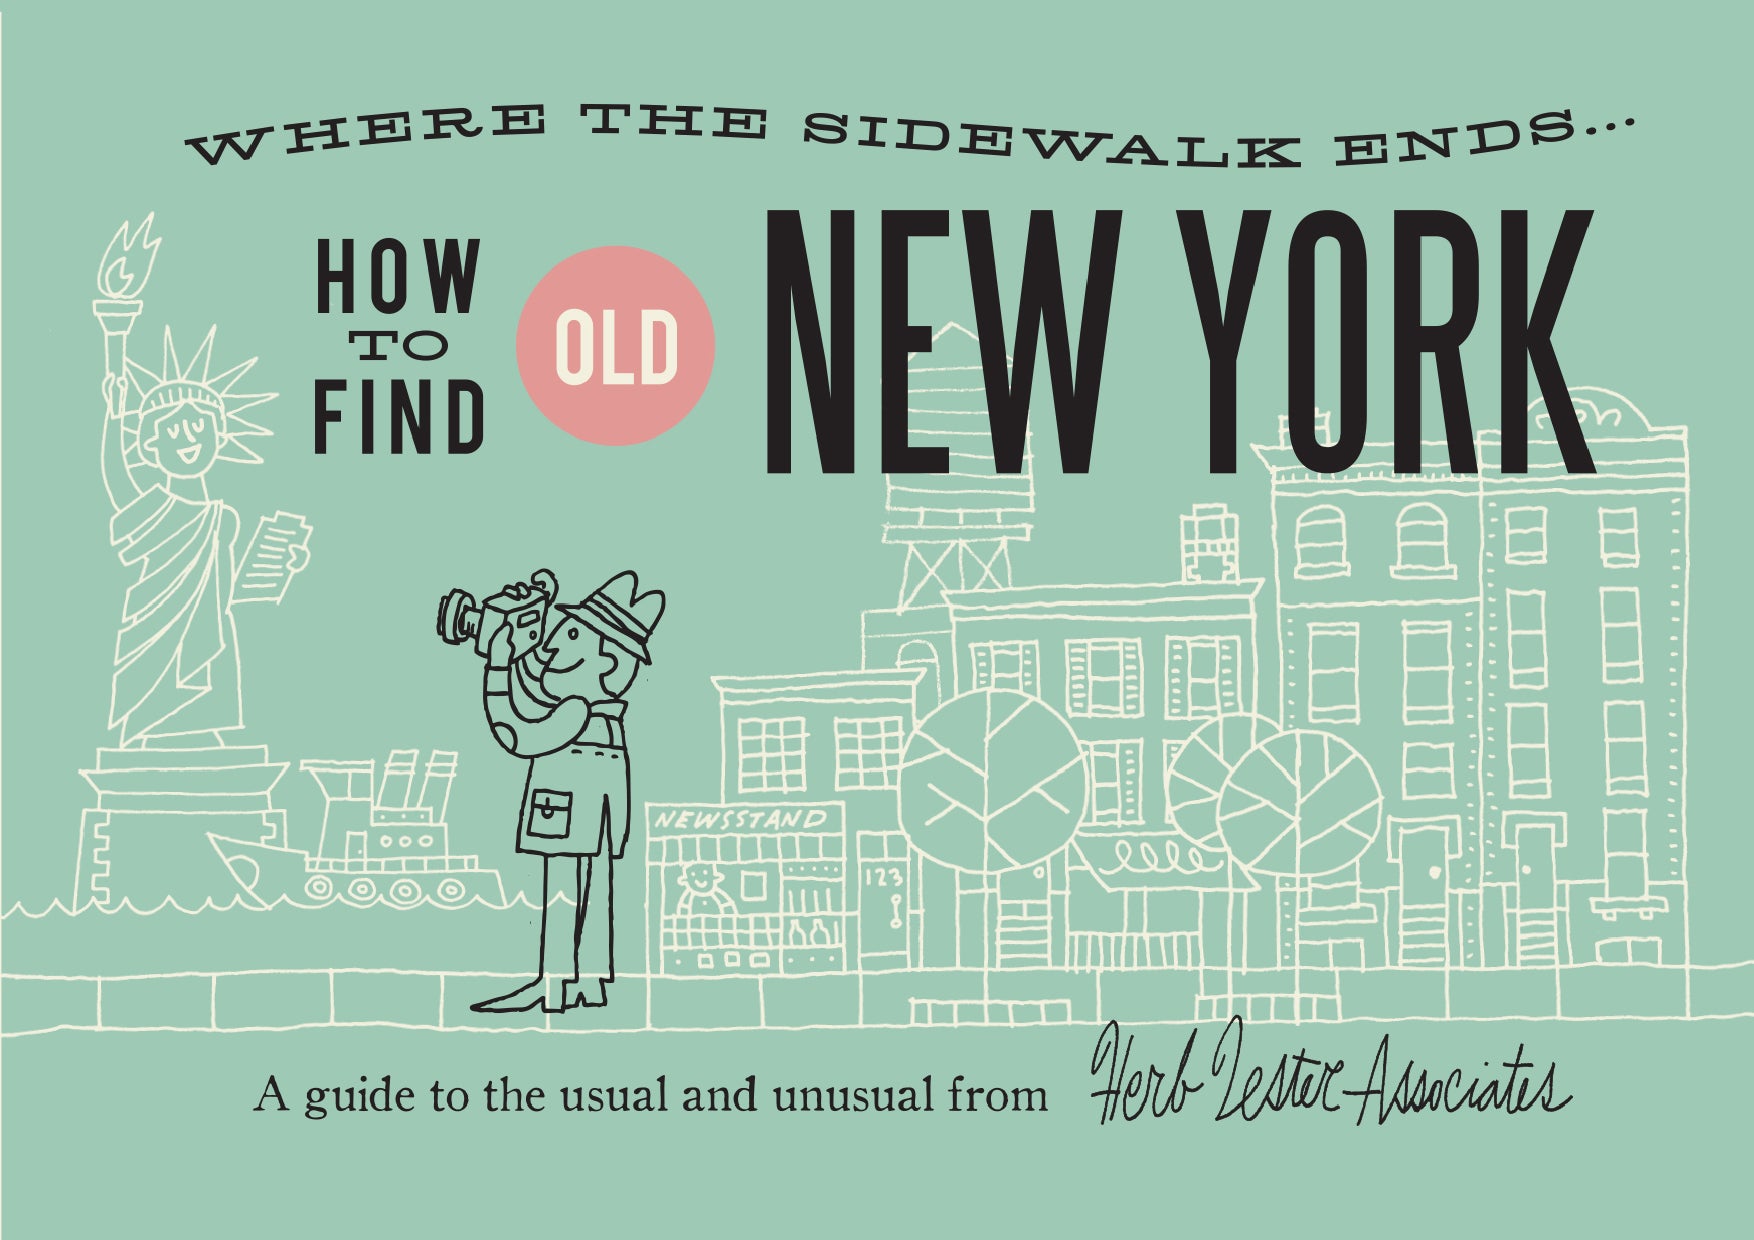 How To Find Old New York cover